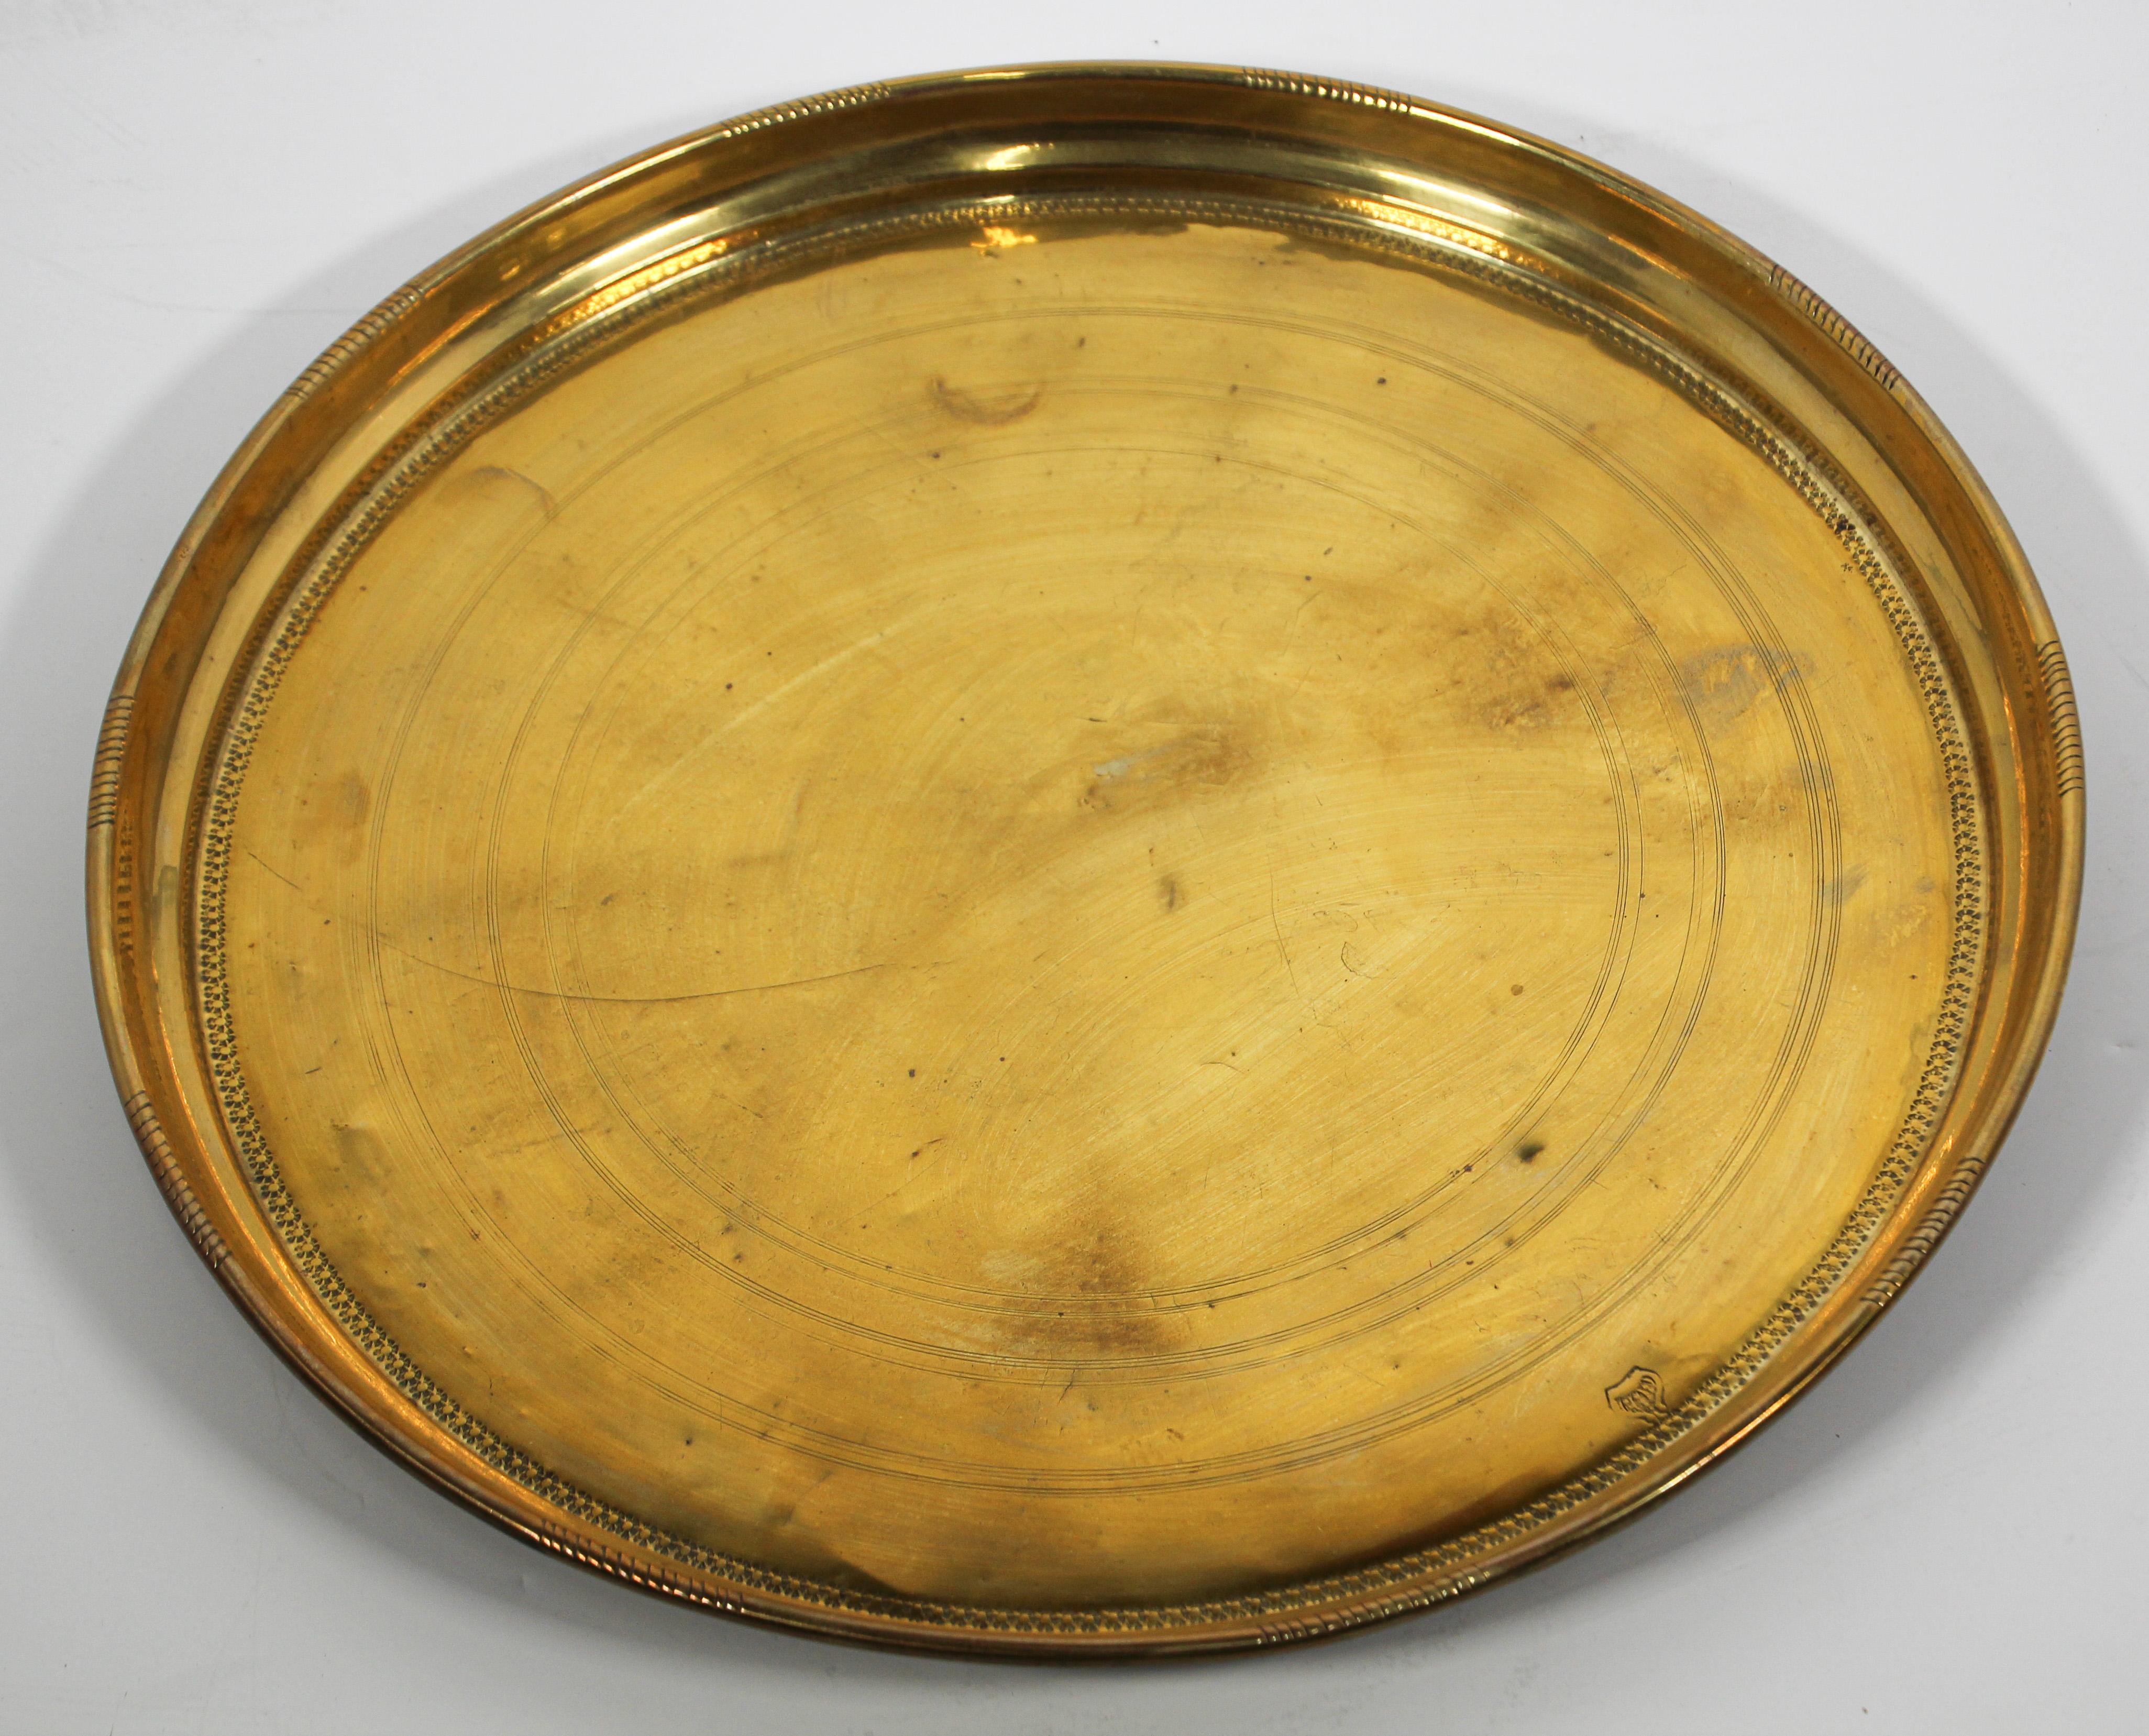 Moroccan antique round brass tray.
The handcrafted circular brass metal platter is decorated and hammered with Islamic Moorish designs.
Heavy brass plate with very Fine hand chased floral and geometric Arabic designs.
Measures: Diameter